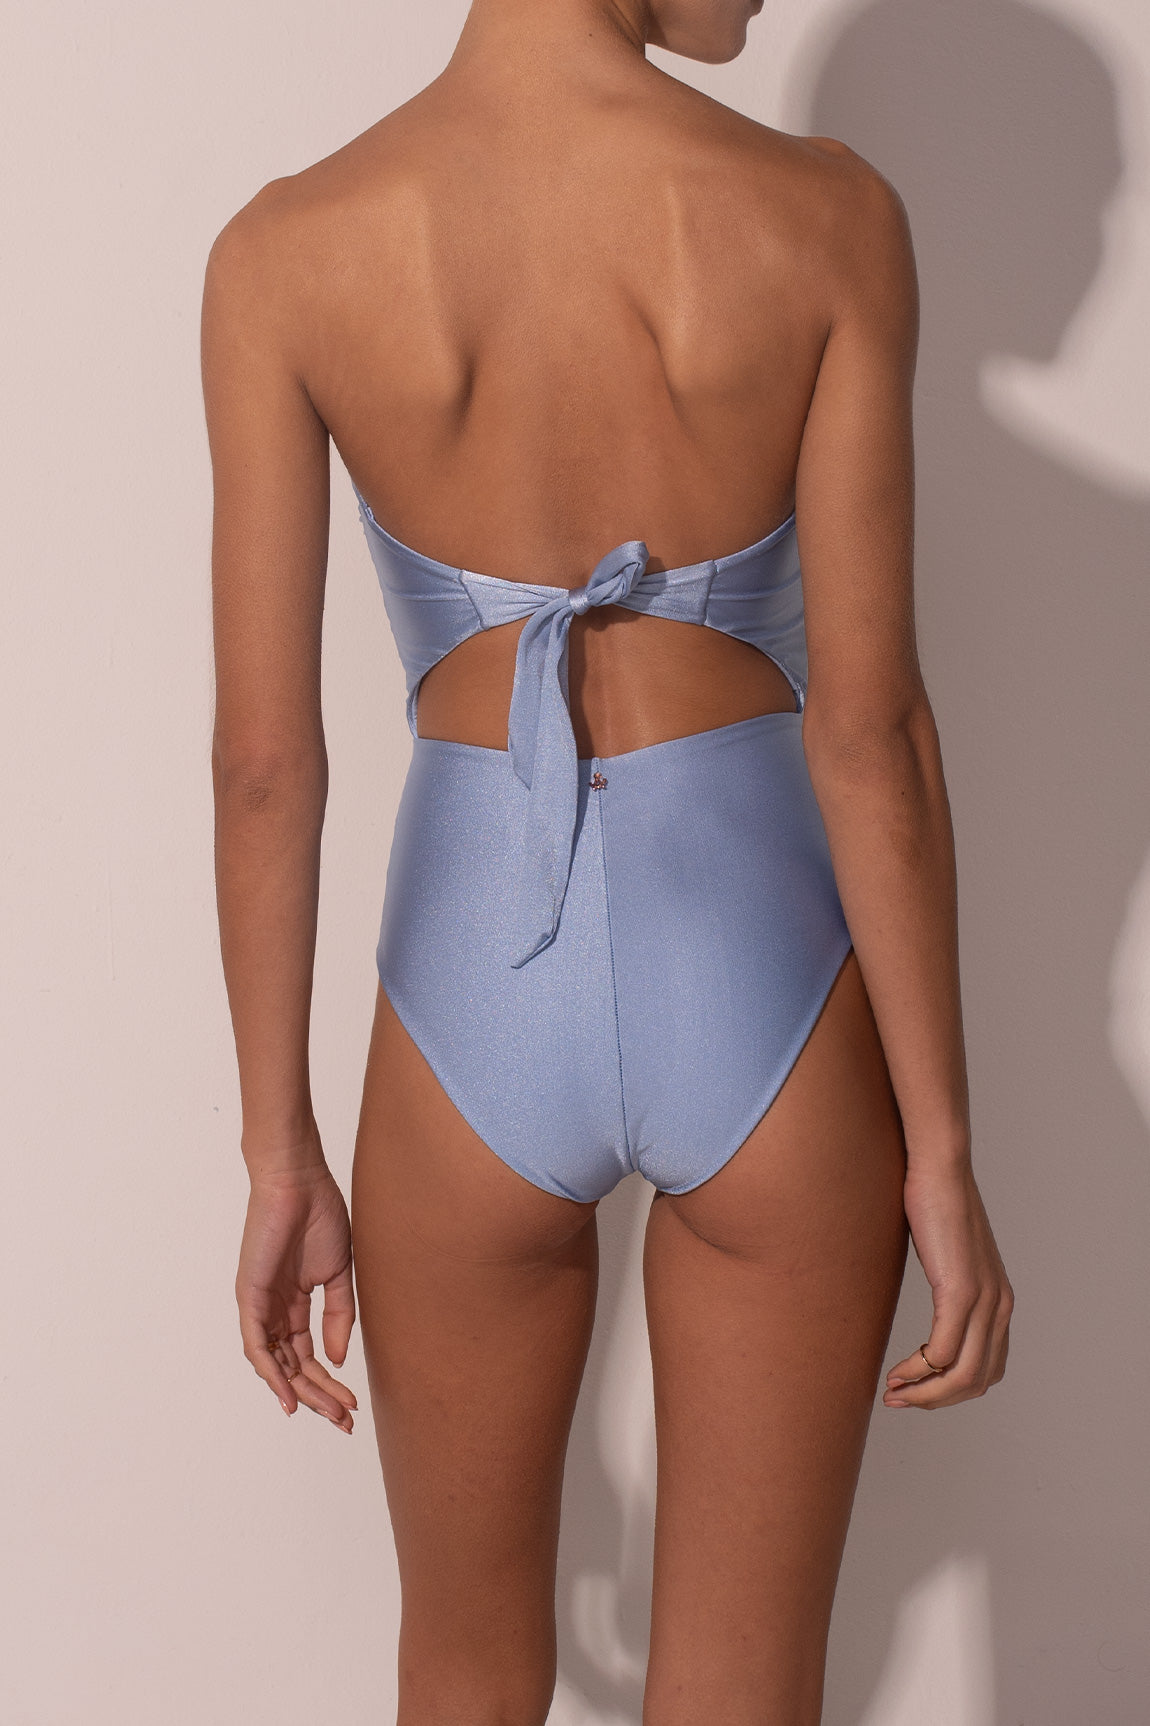 The Blue Draped One Piece